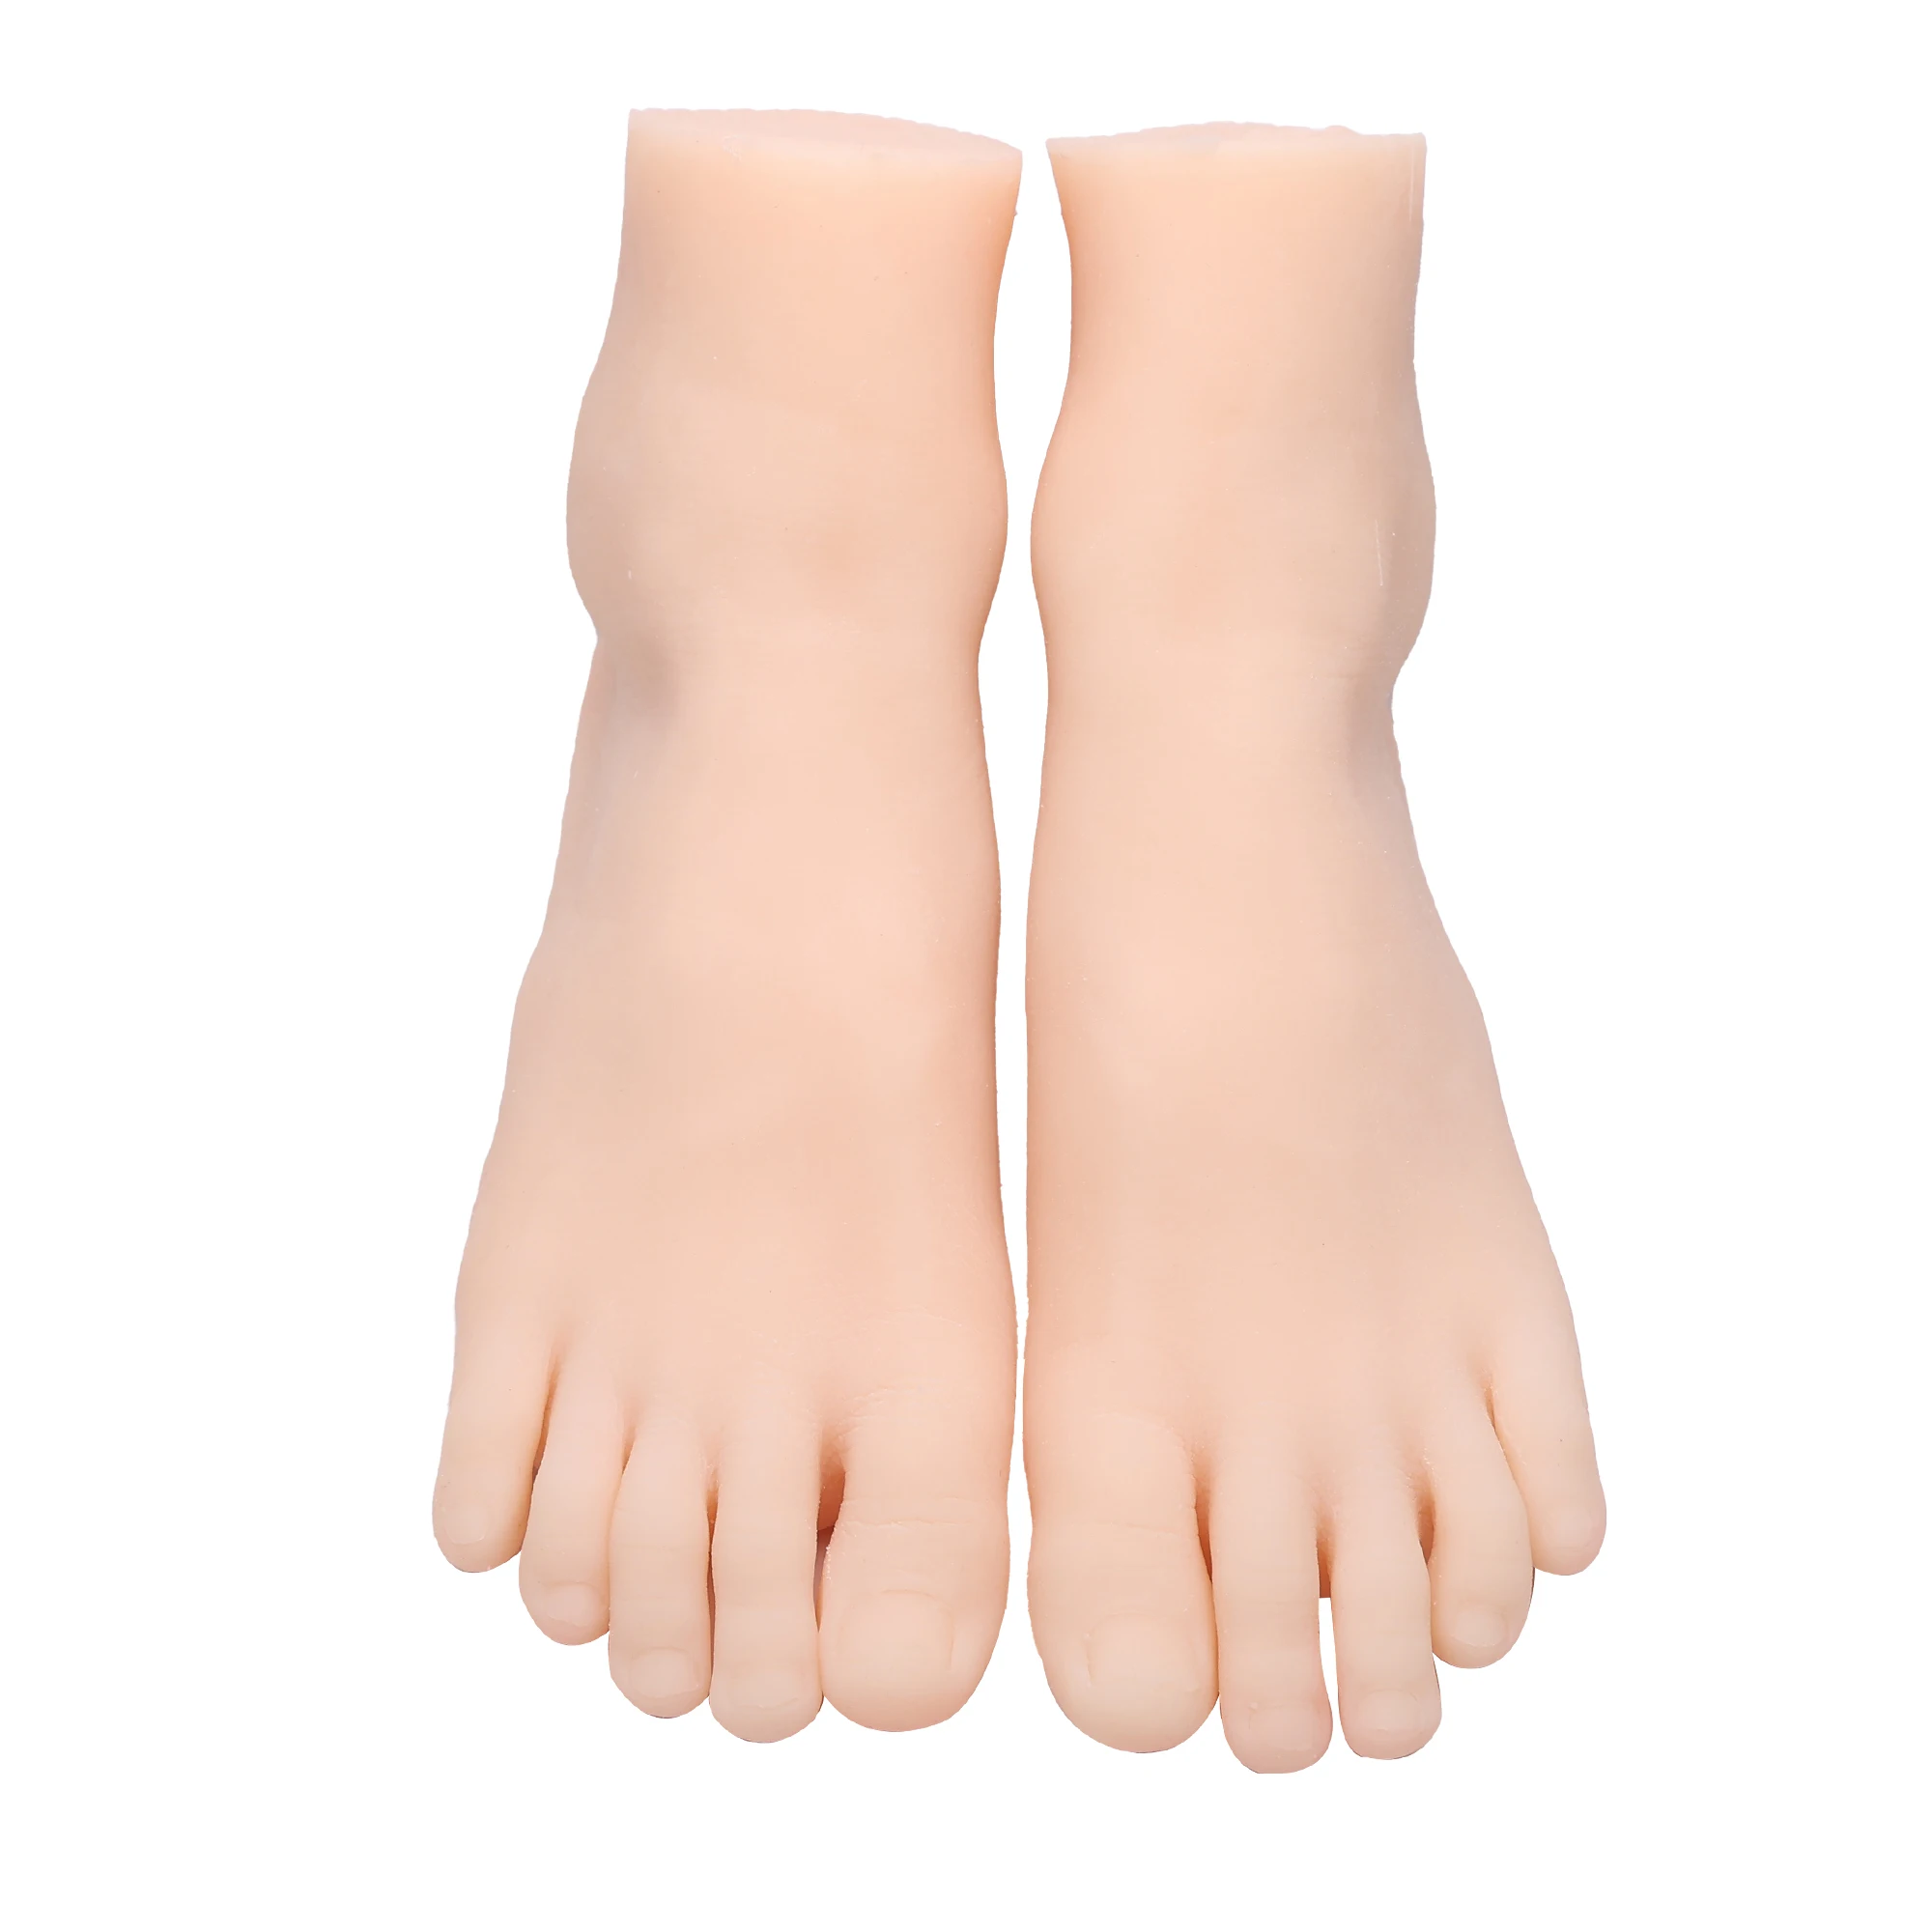 19cm Little kids girl's real small size simulation foot model photo stockings shoes TPEH31